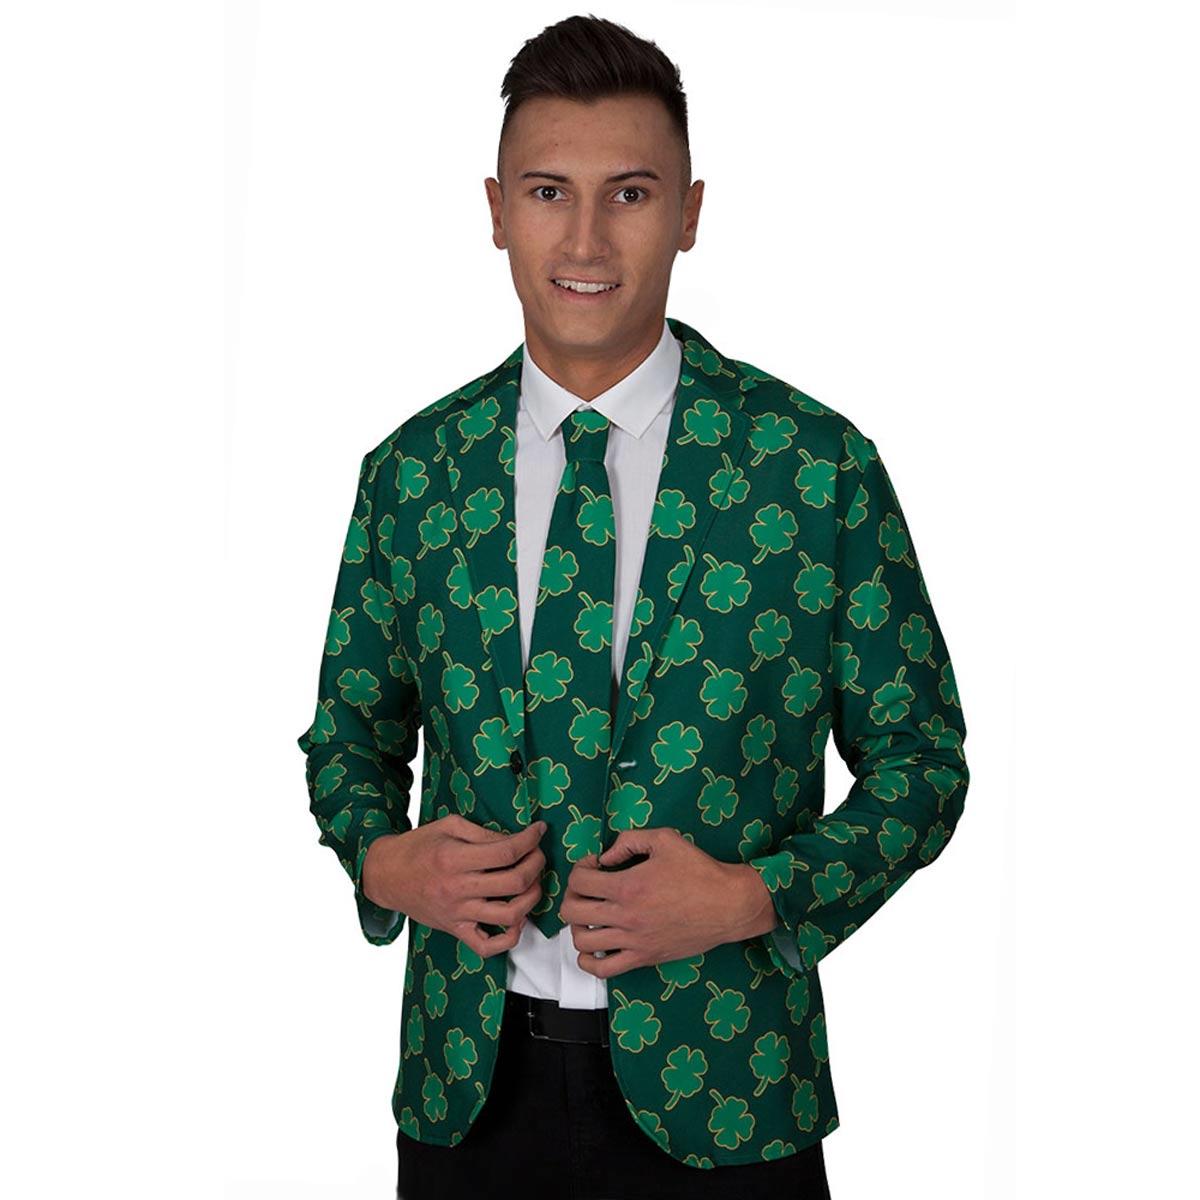 Irish Jacket and Tie by Wicked EM-3254 in med, lrg and xl available here at Karnival Costumes online party shop